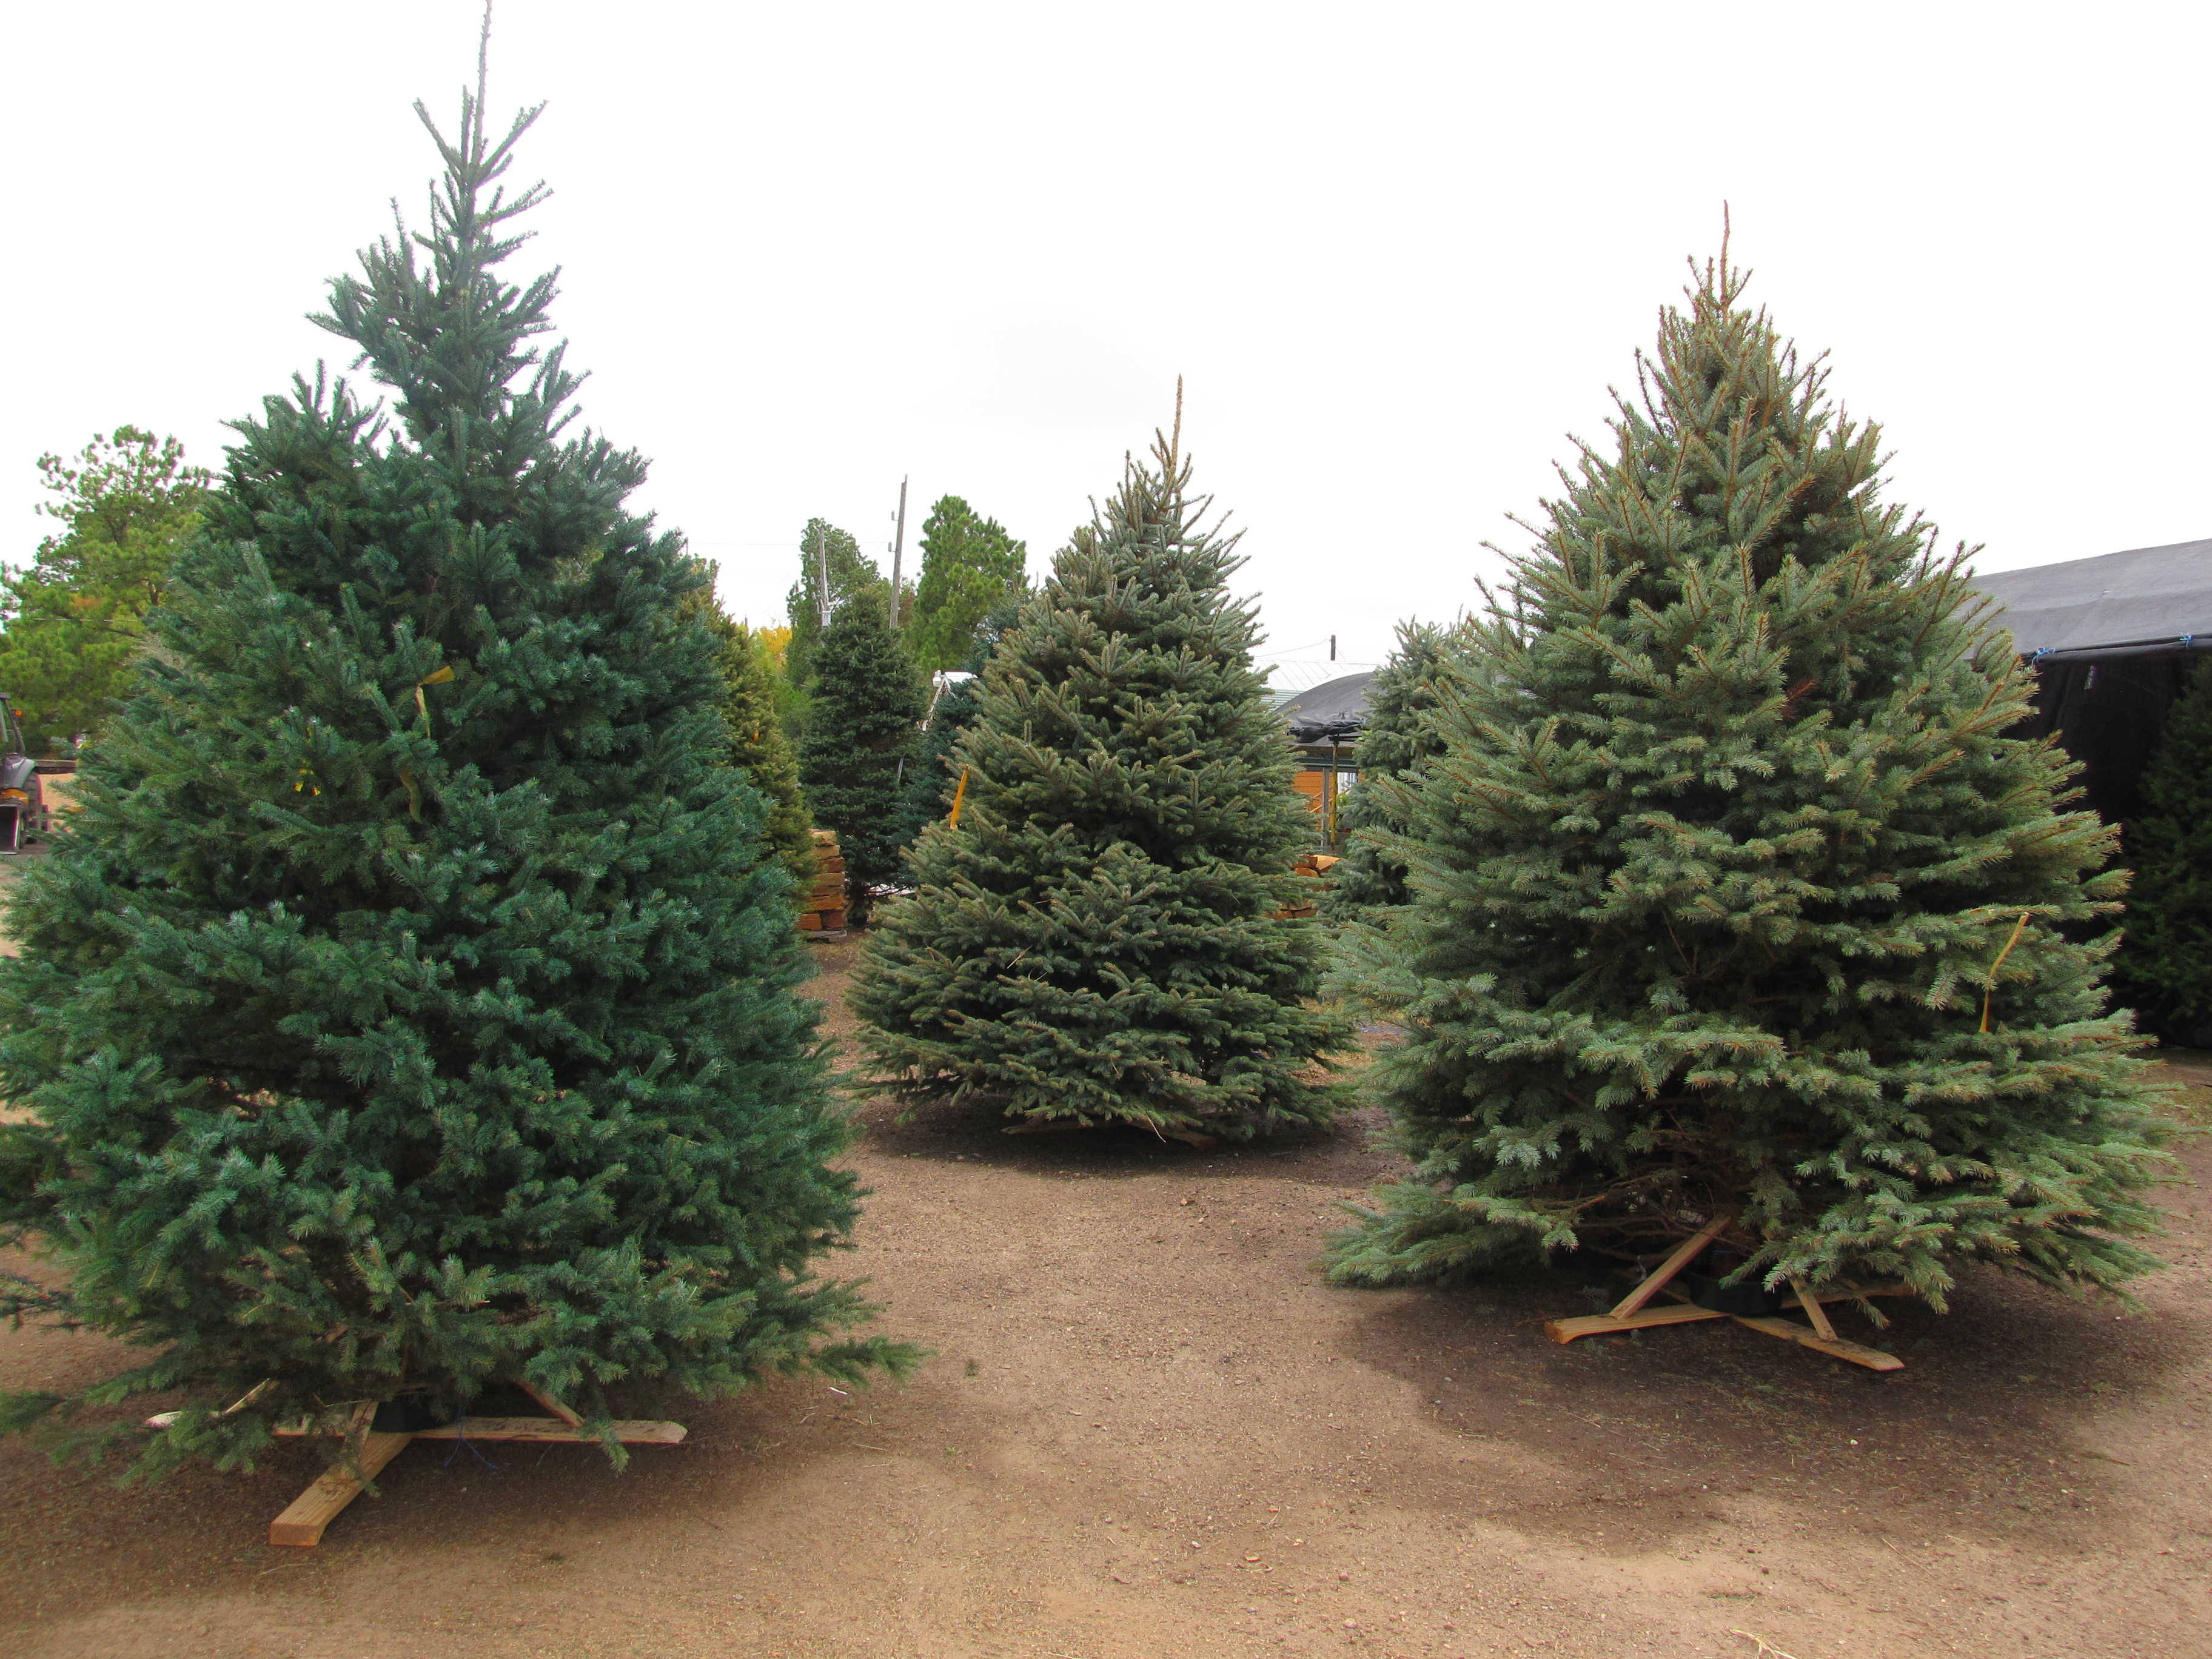 Seasonal Products including Christmas Trees and Fireworks at Madison Gardens Nursery, Spring, TX.